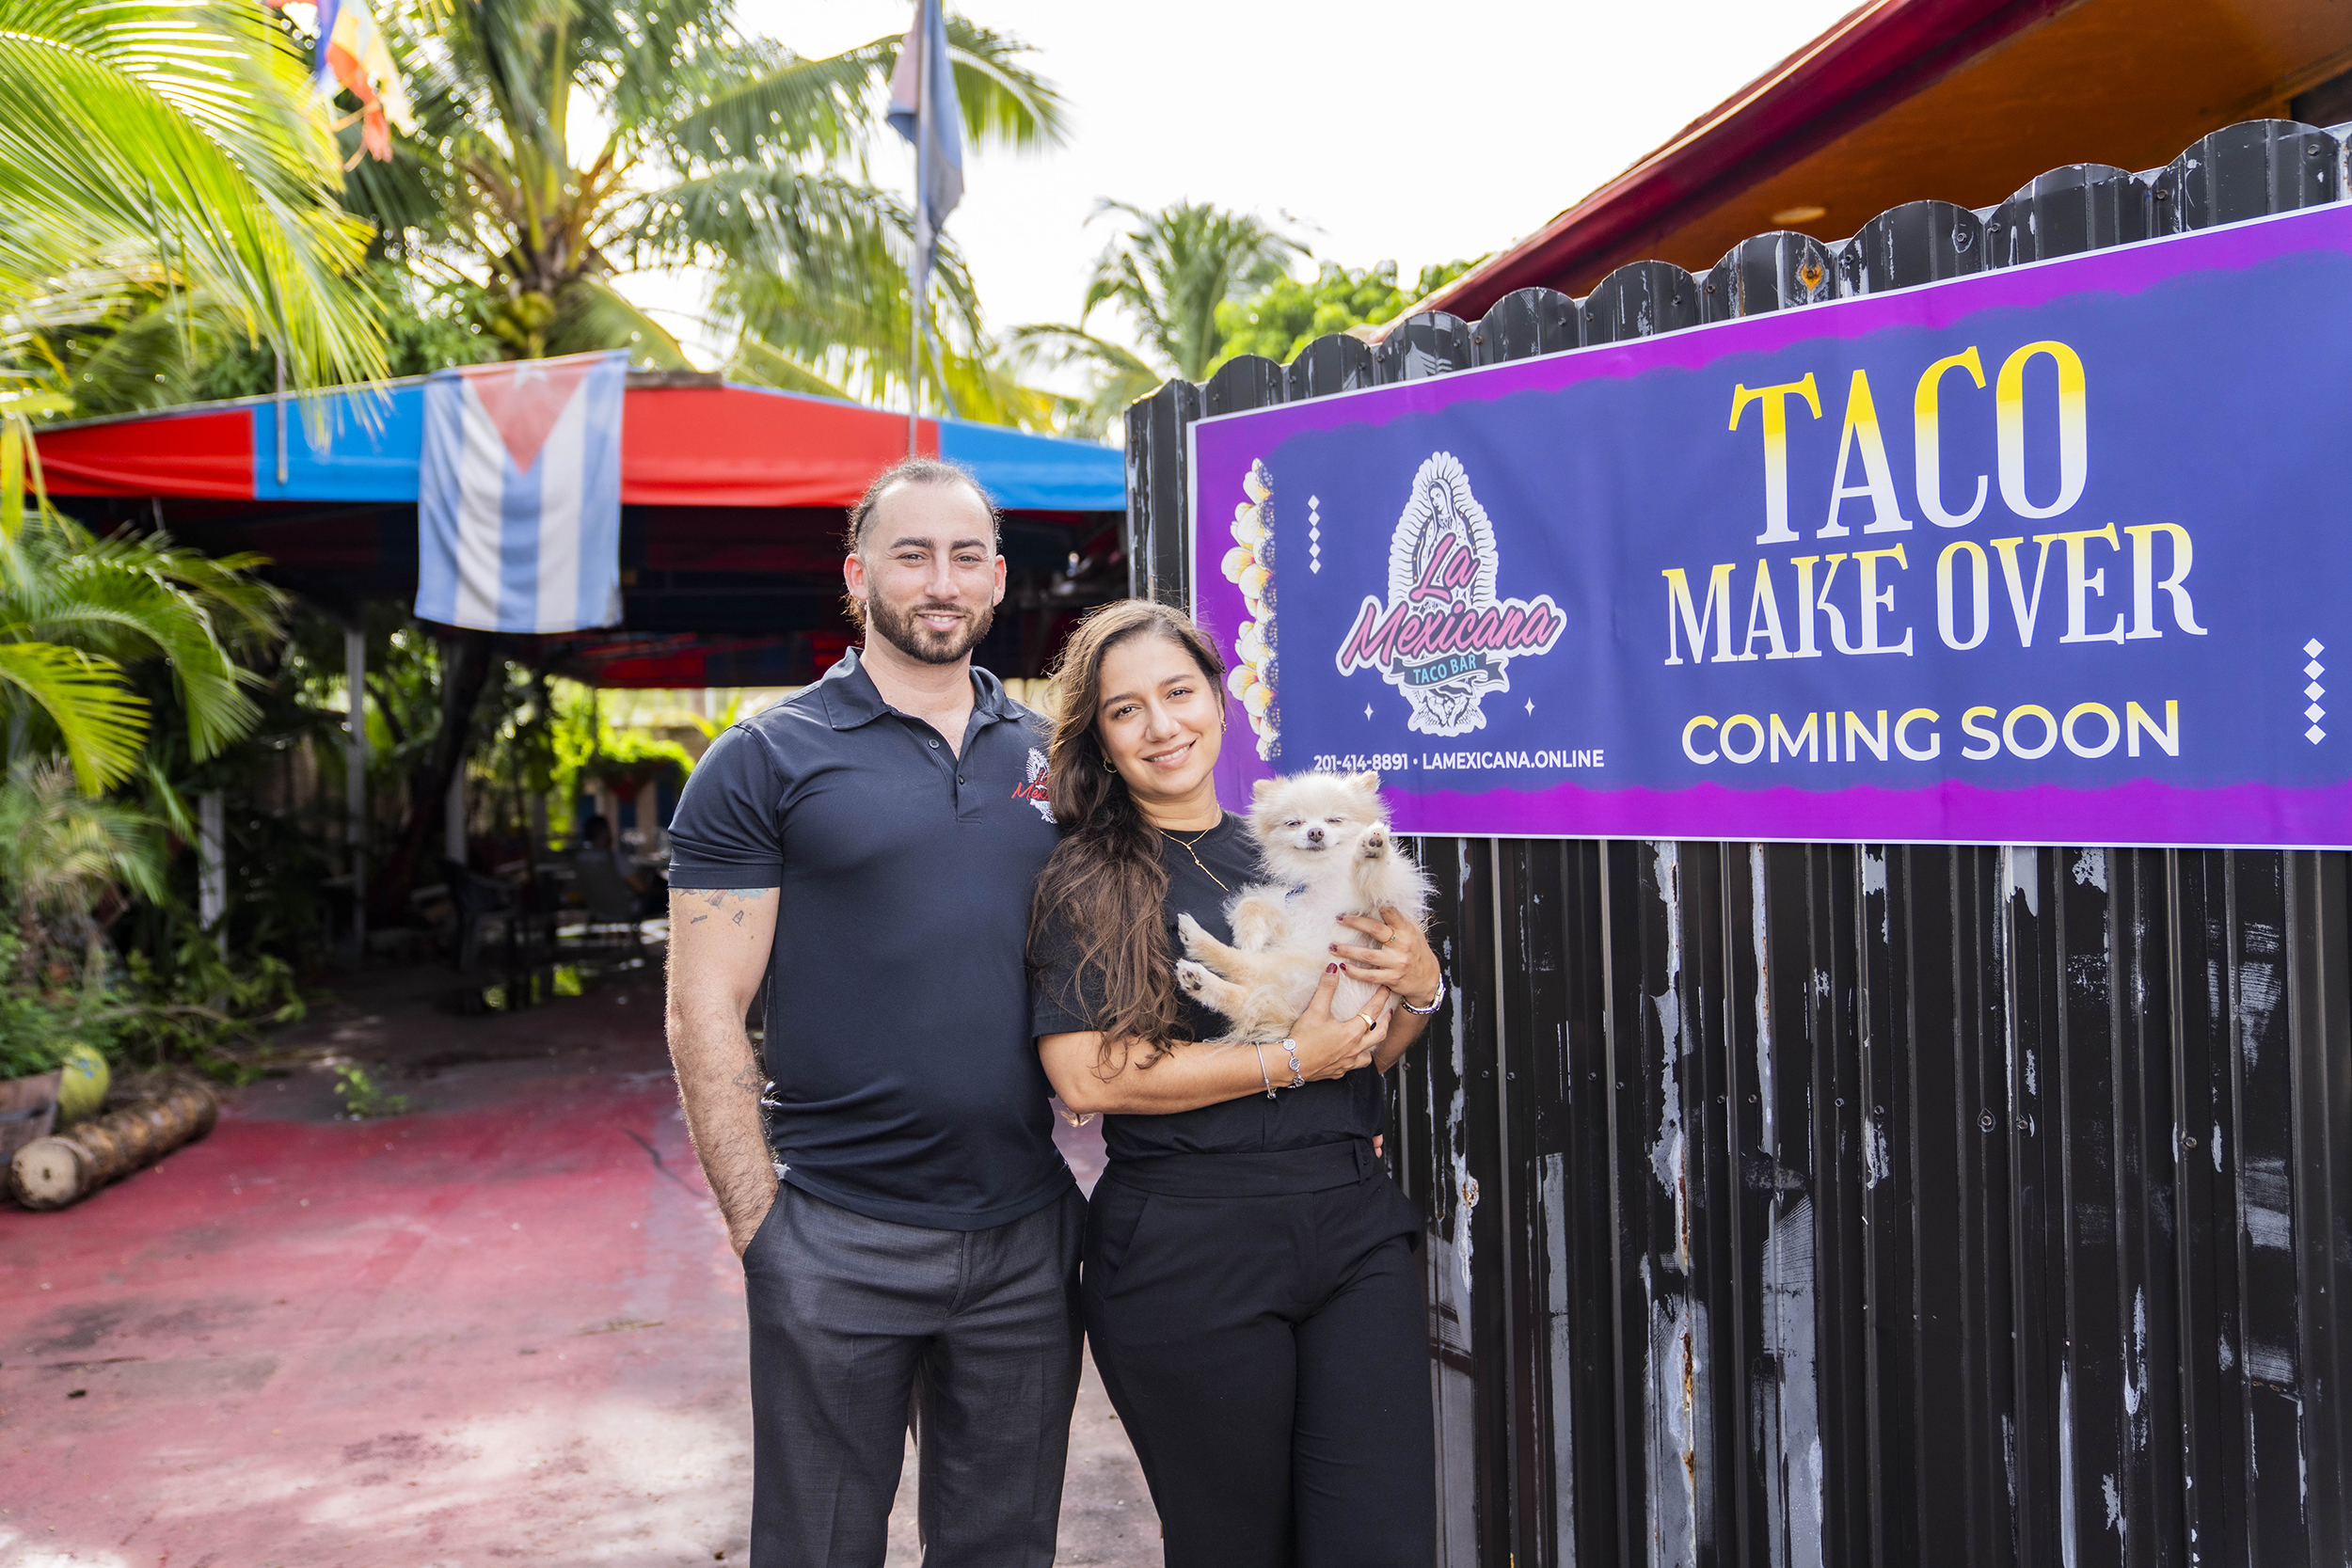 Diva Name and John Whelden will open their newest La Mexicana Taco Bar location in Wilton Manors. This is the iconic home of 925 Nuevos Cubanos.